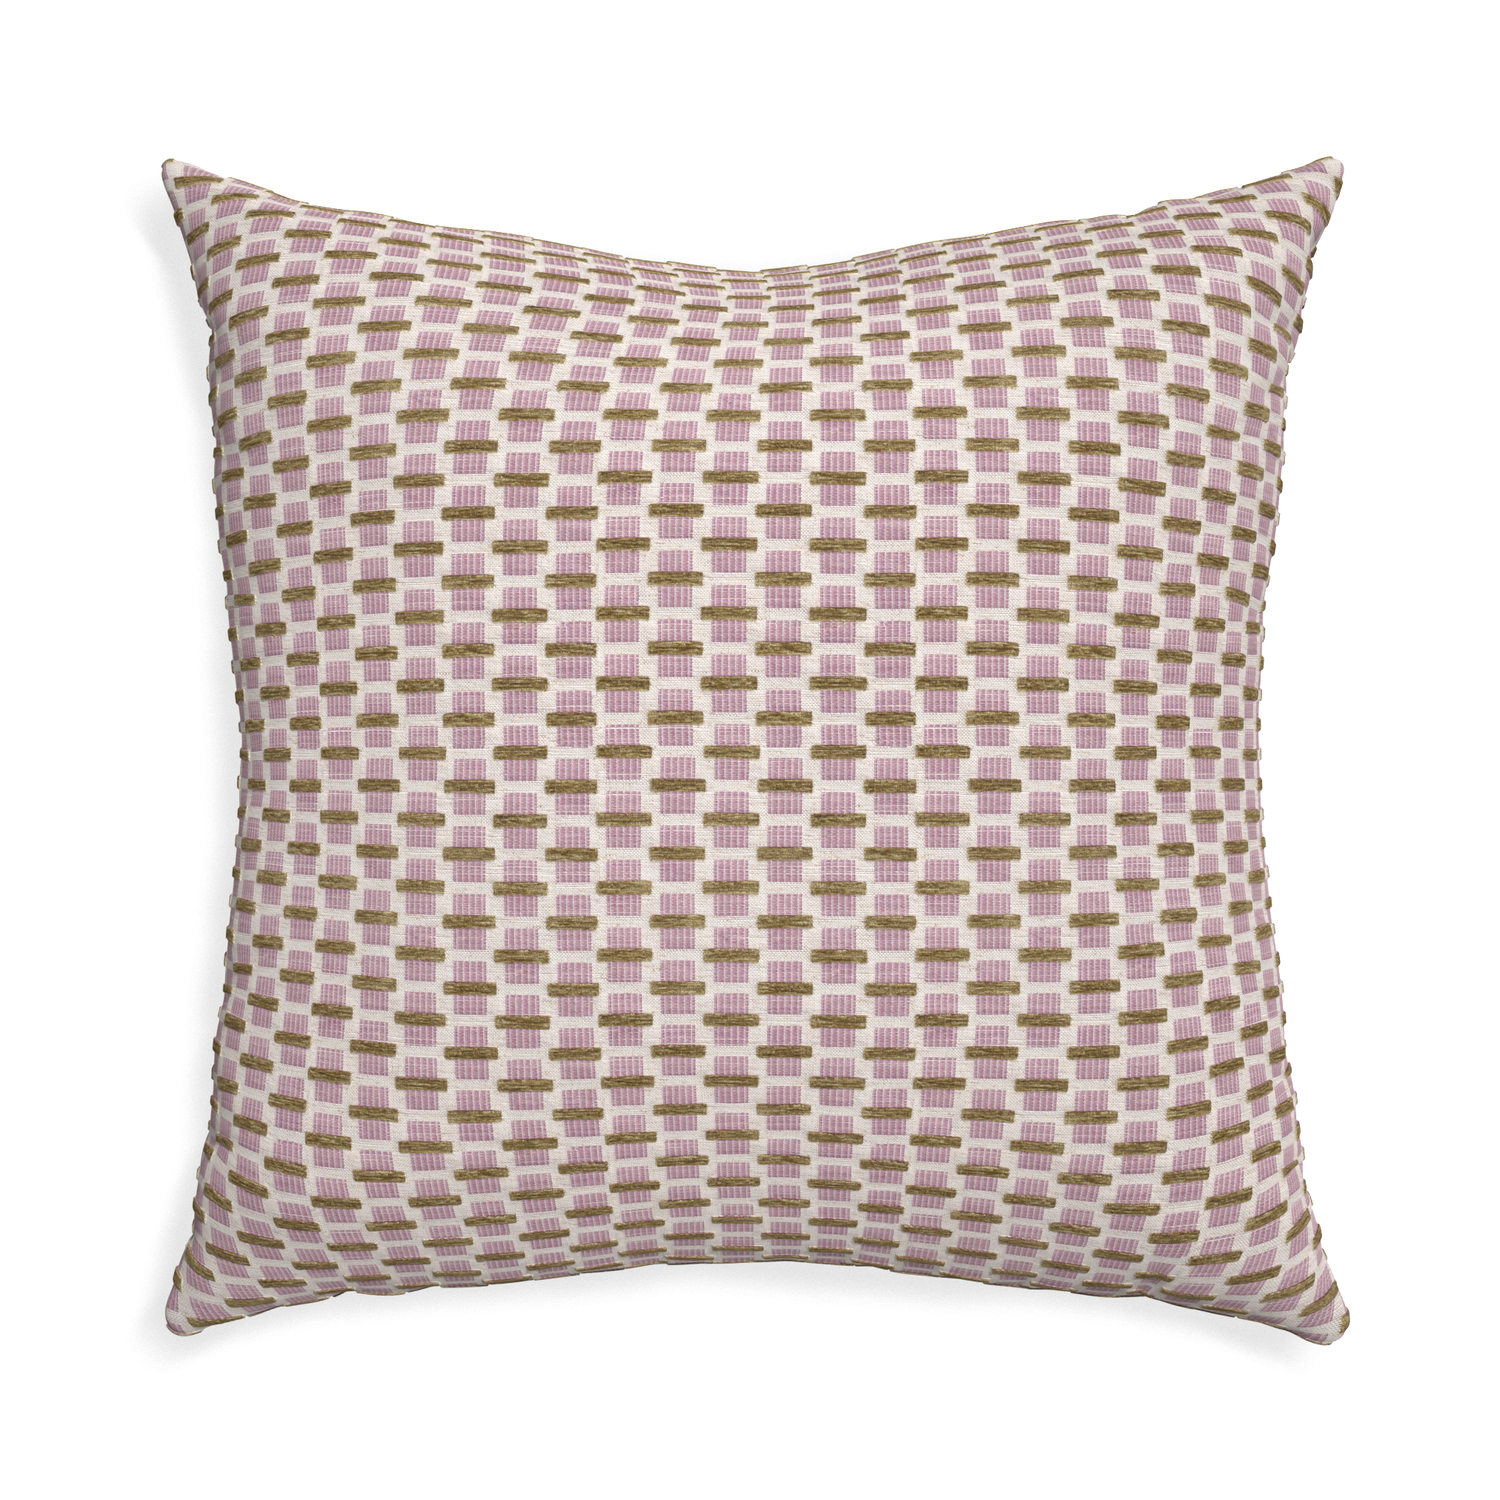 Euro-sham willow orchid custom pink geometric chenillepillow with none on white background